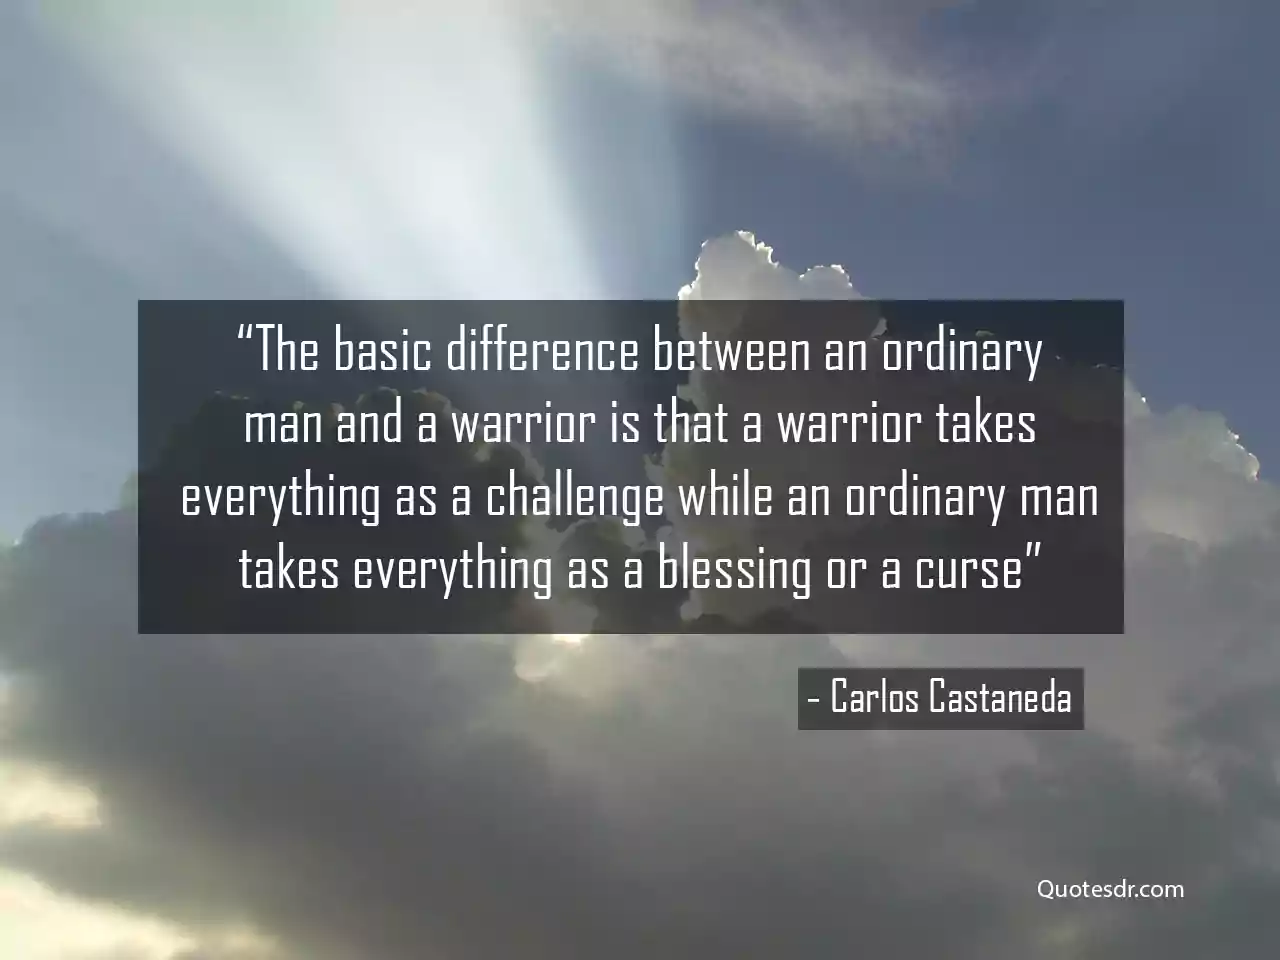 Carlos Castaneda Quotes: 31+ Sayings to Change Your Life